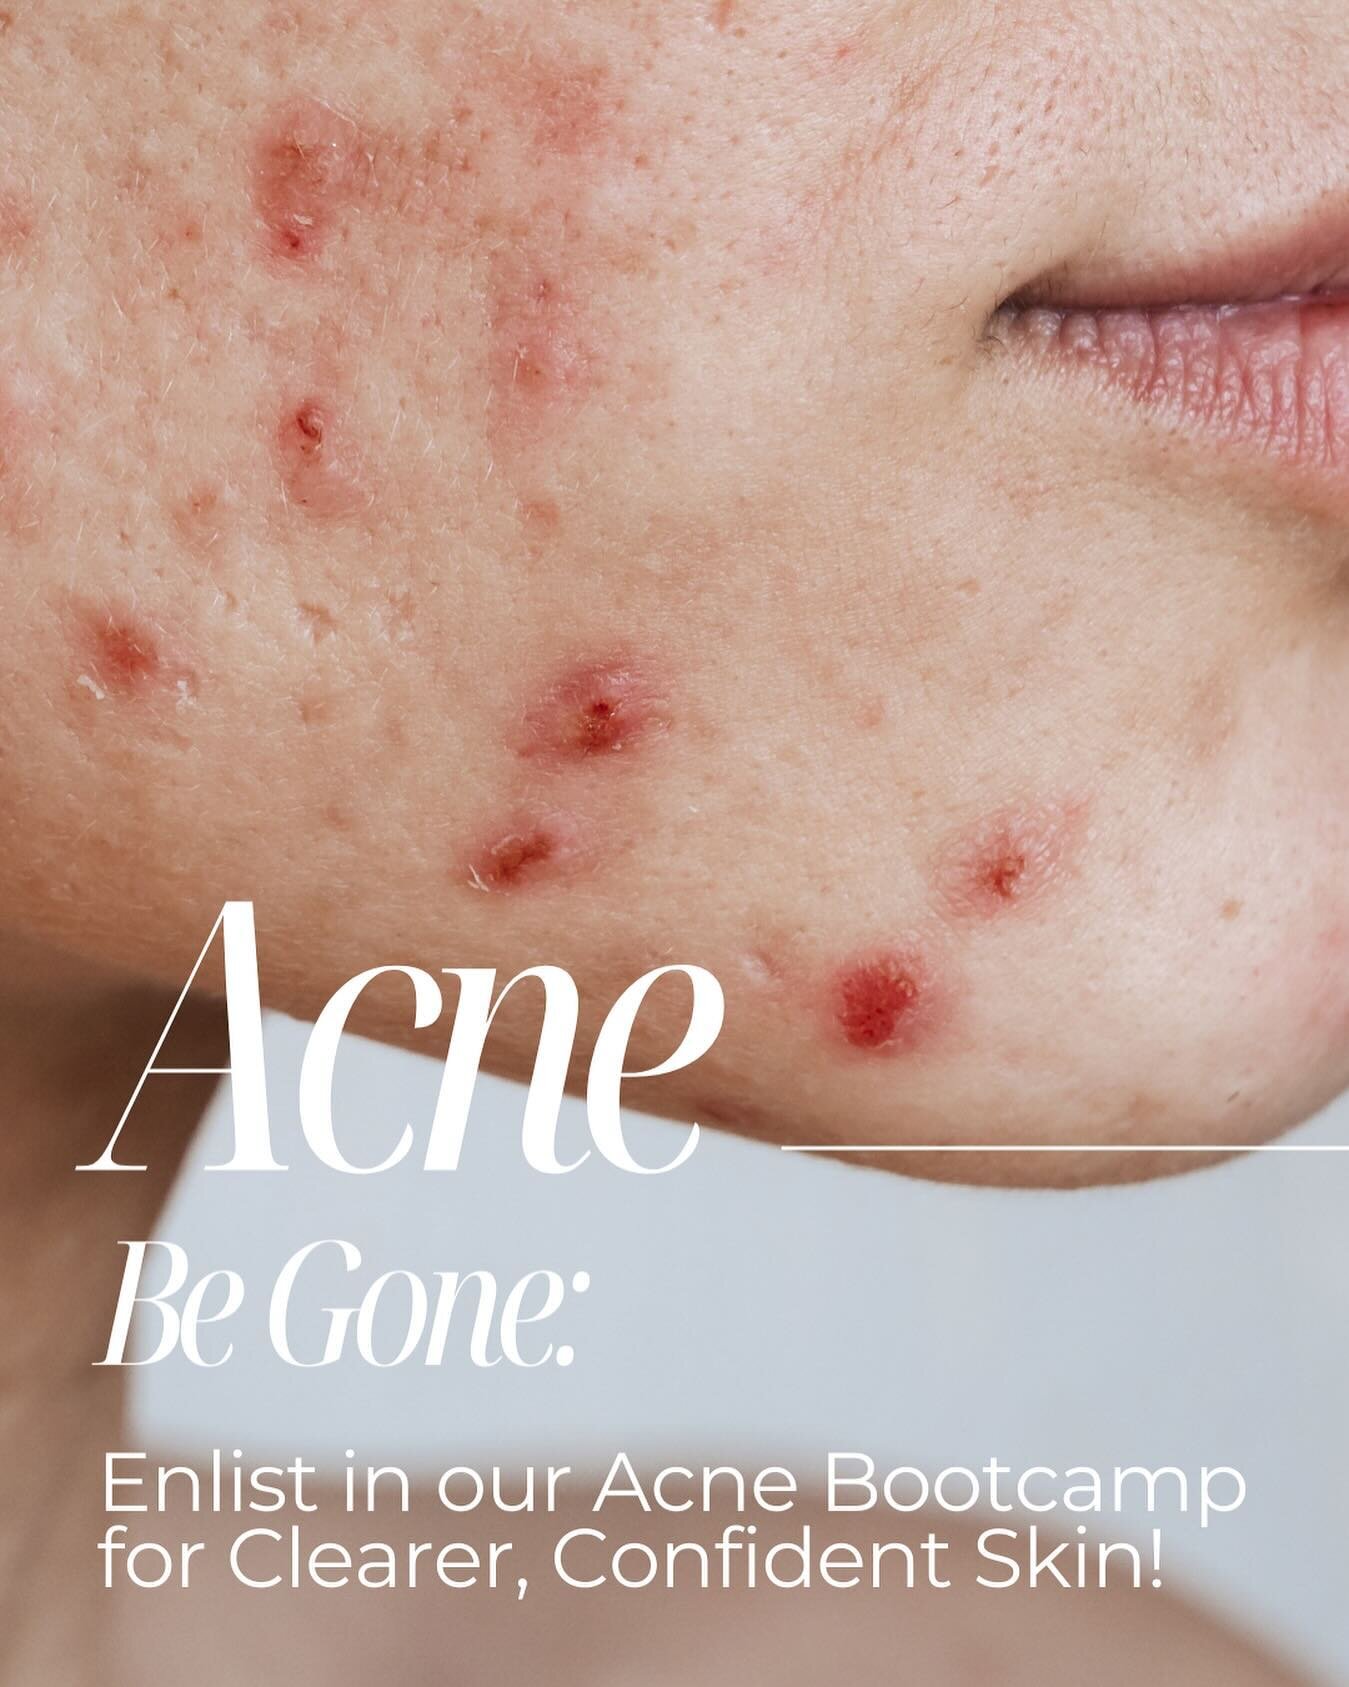 ✨ Acne, be gone! 🚫 Say goodbye to breakouts and hello to radiant skin by summer! ☀️✨ 

Book your spot in our Acne Bootcamp now and let us transform your skin. No more need for makeup &ndash; just natural beauty shining through! 💖💪 

Leave a commen